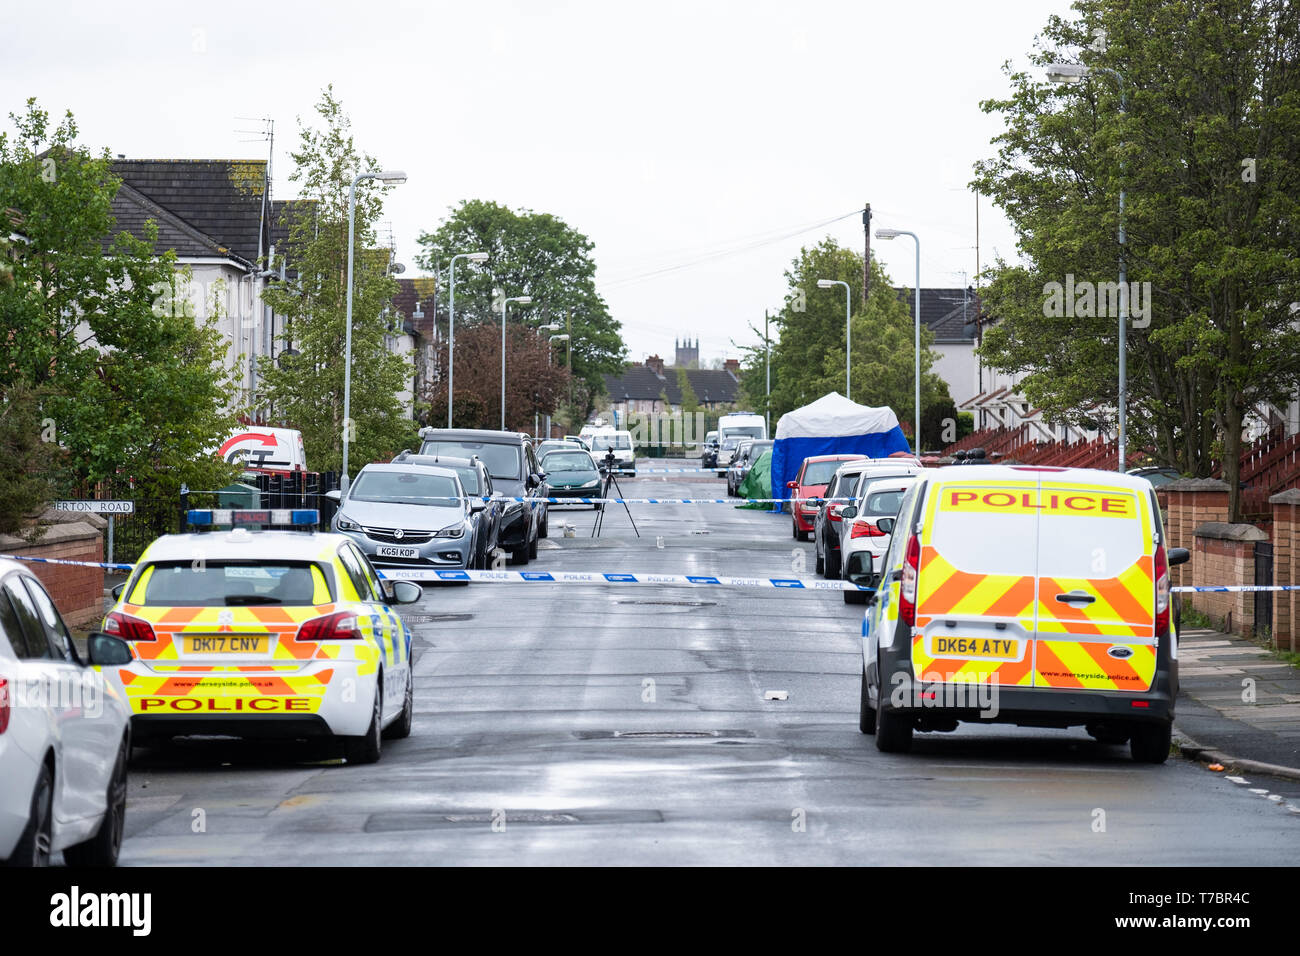 Bootle, Merseyside, UK. 6th May, 2019. A murder investigation has been launched after a man was found in Monfa Road in the Bootle area of Sefton in Merseyside at around 1:55am on Monday, May 6, 2019 following reports of an altercation. The man was taken to hospital where he died. Credit: Christopher Middleton/Alamy Live News Stock Photo